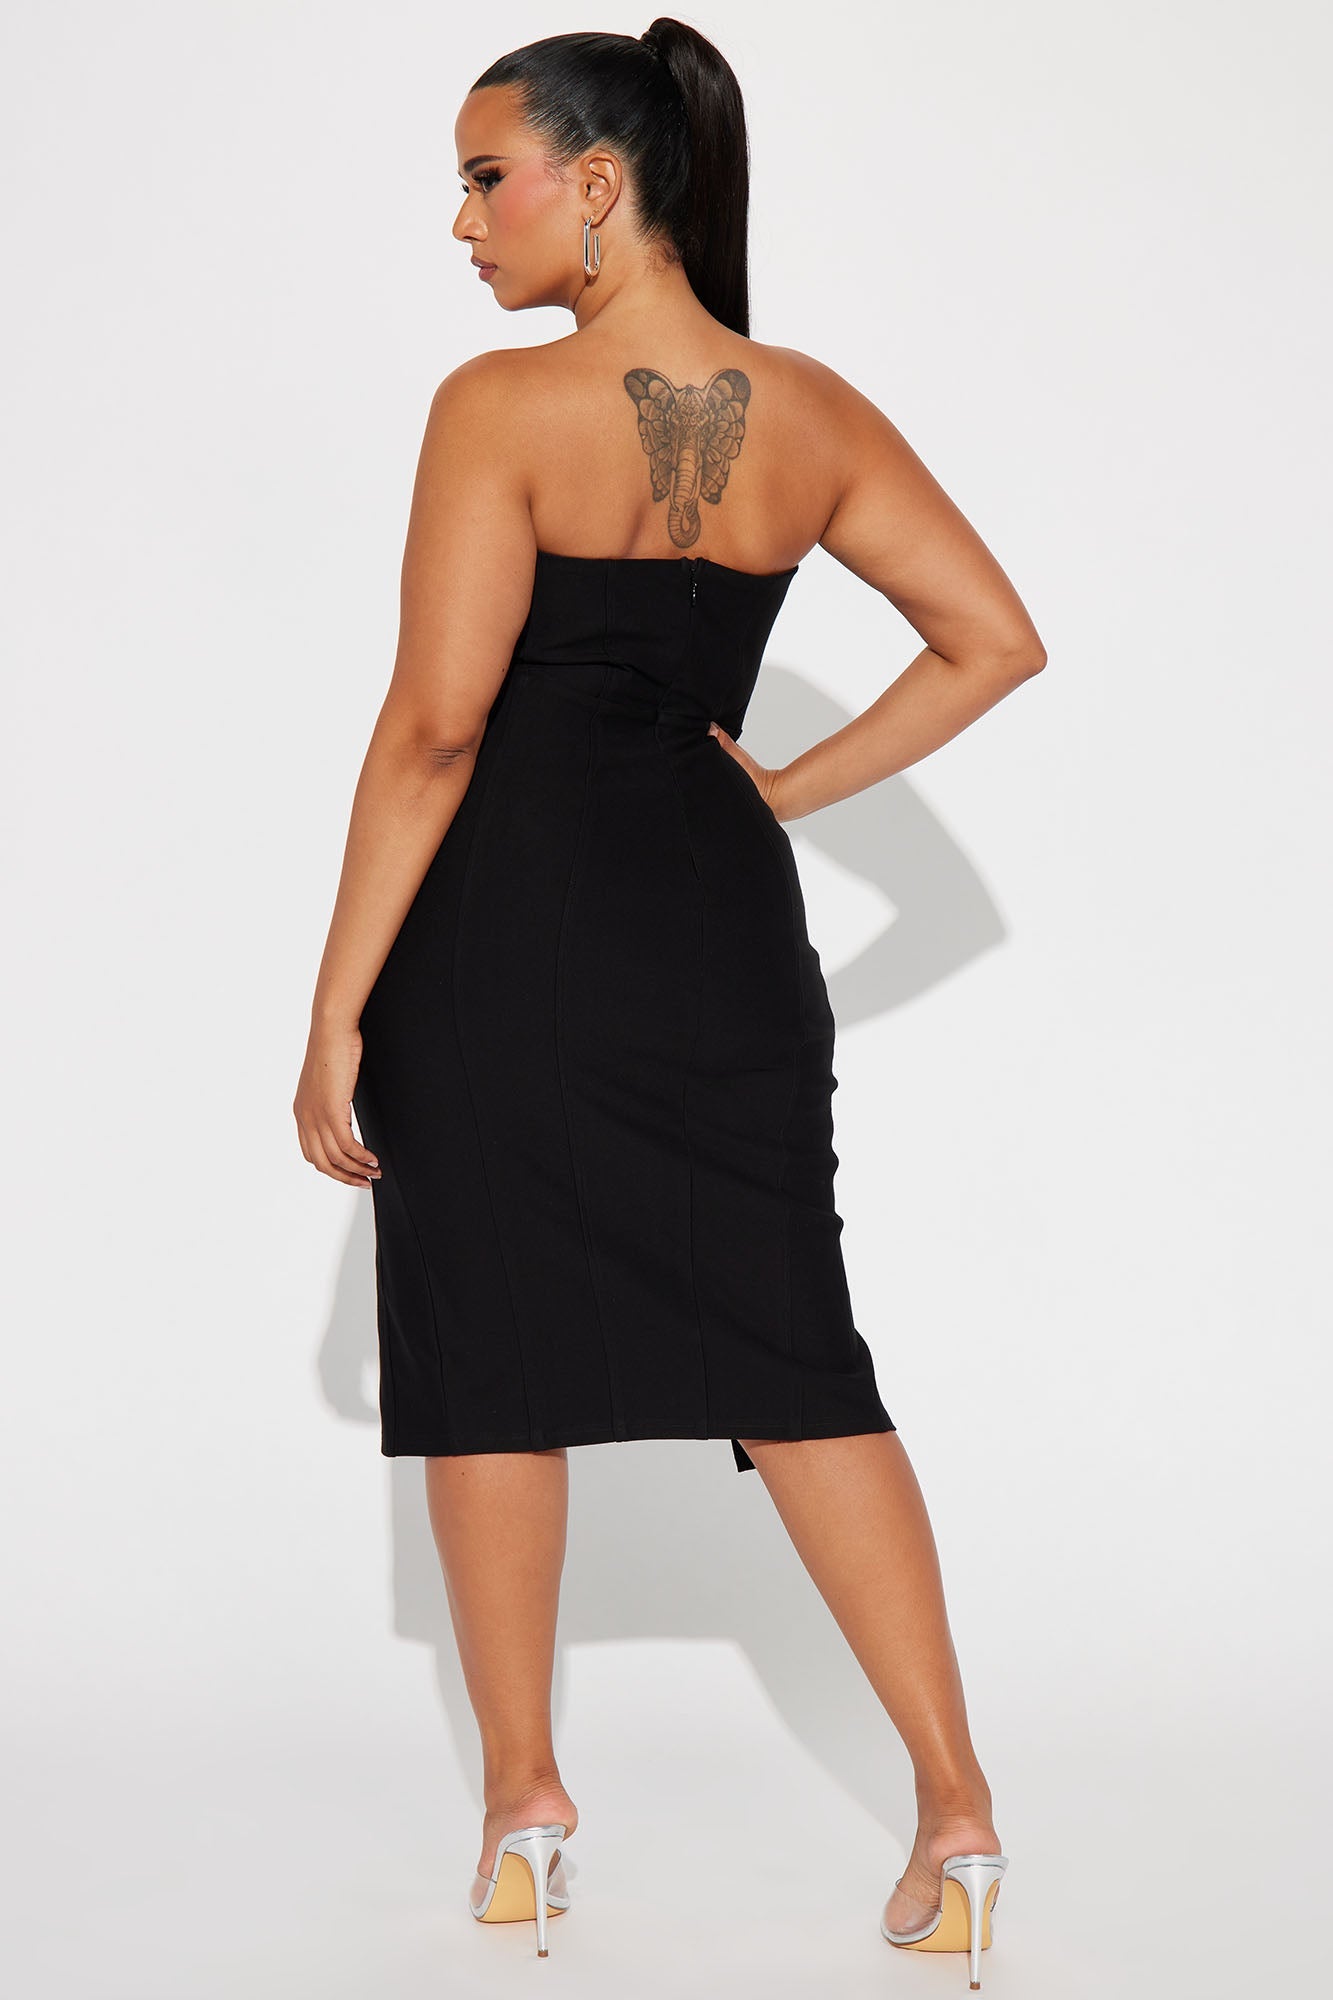 Sultry Sophistication: Islands Corset Midi Dress in Black